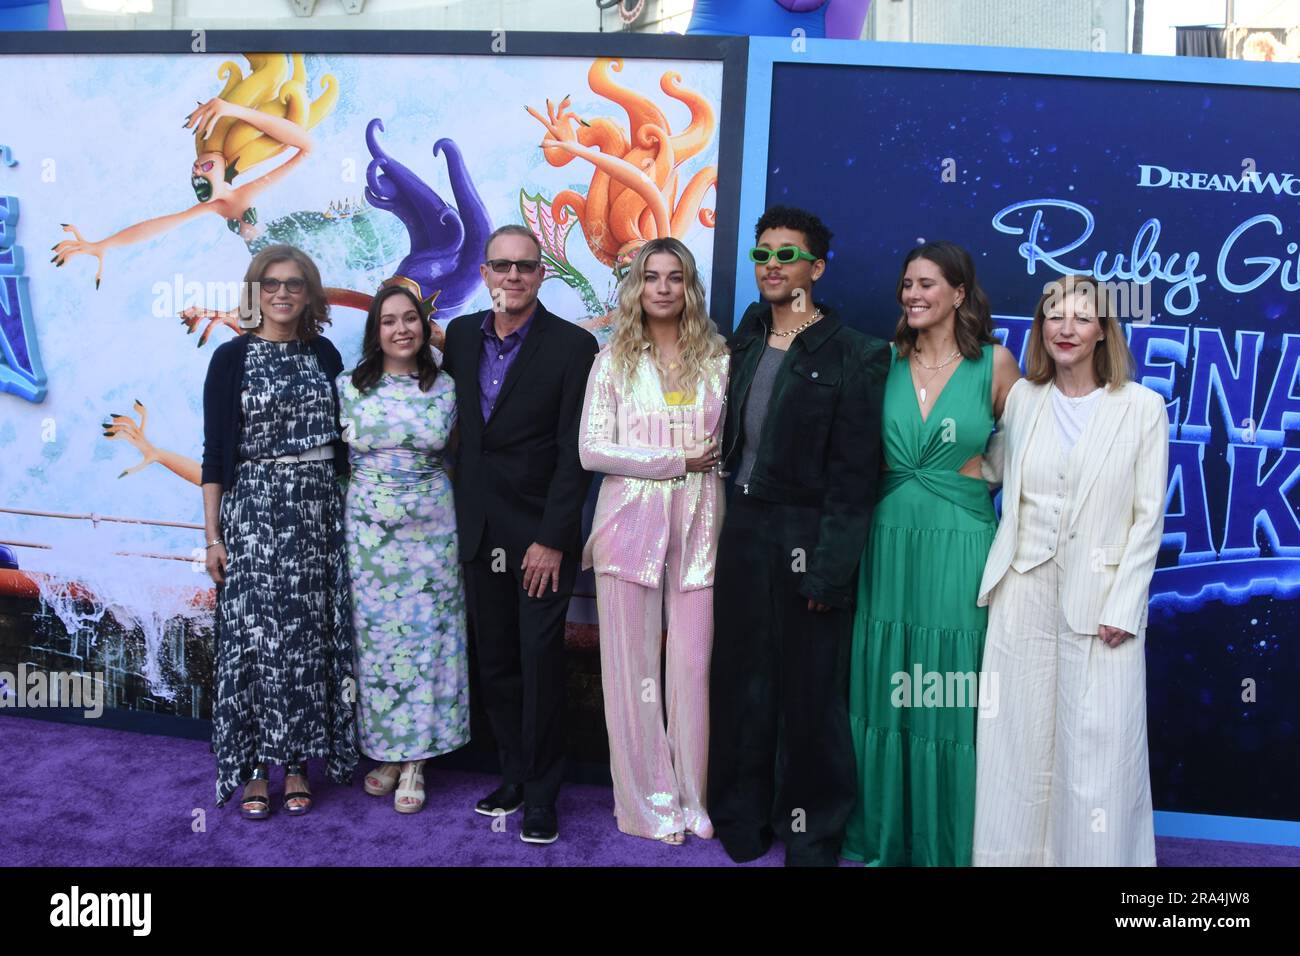 Los Angeles, California. 28th June 2023 os Angeles, California. 28th June 2023 (L-R) President of Dreamworks Margie Cohn. Co-Director Faryn Pearl, Director Kirk DeMicco, Actress Annie Murphy, Actor Jaboukie Young-White, Producer Kelly Cooney Ciella, and Kristin Lowe attend Universal Pictures Ruby Gillman: Teenage Kraken Premiere at TCL Chinese Theatre on June 28, 2023 in Los Angeles, California, USA. Photo by Barry King/Alamy Stock Photo Stock Photo